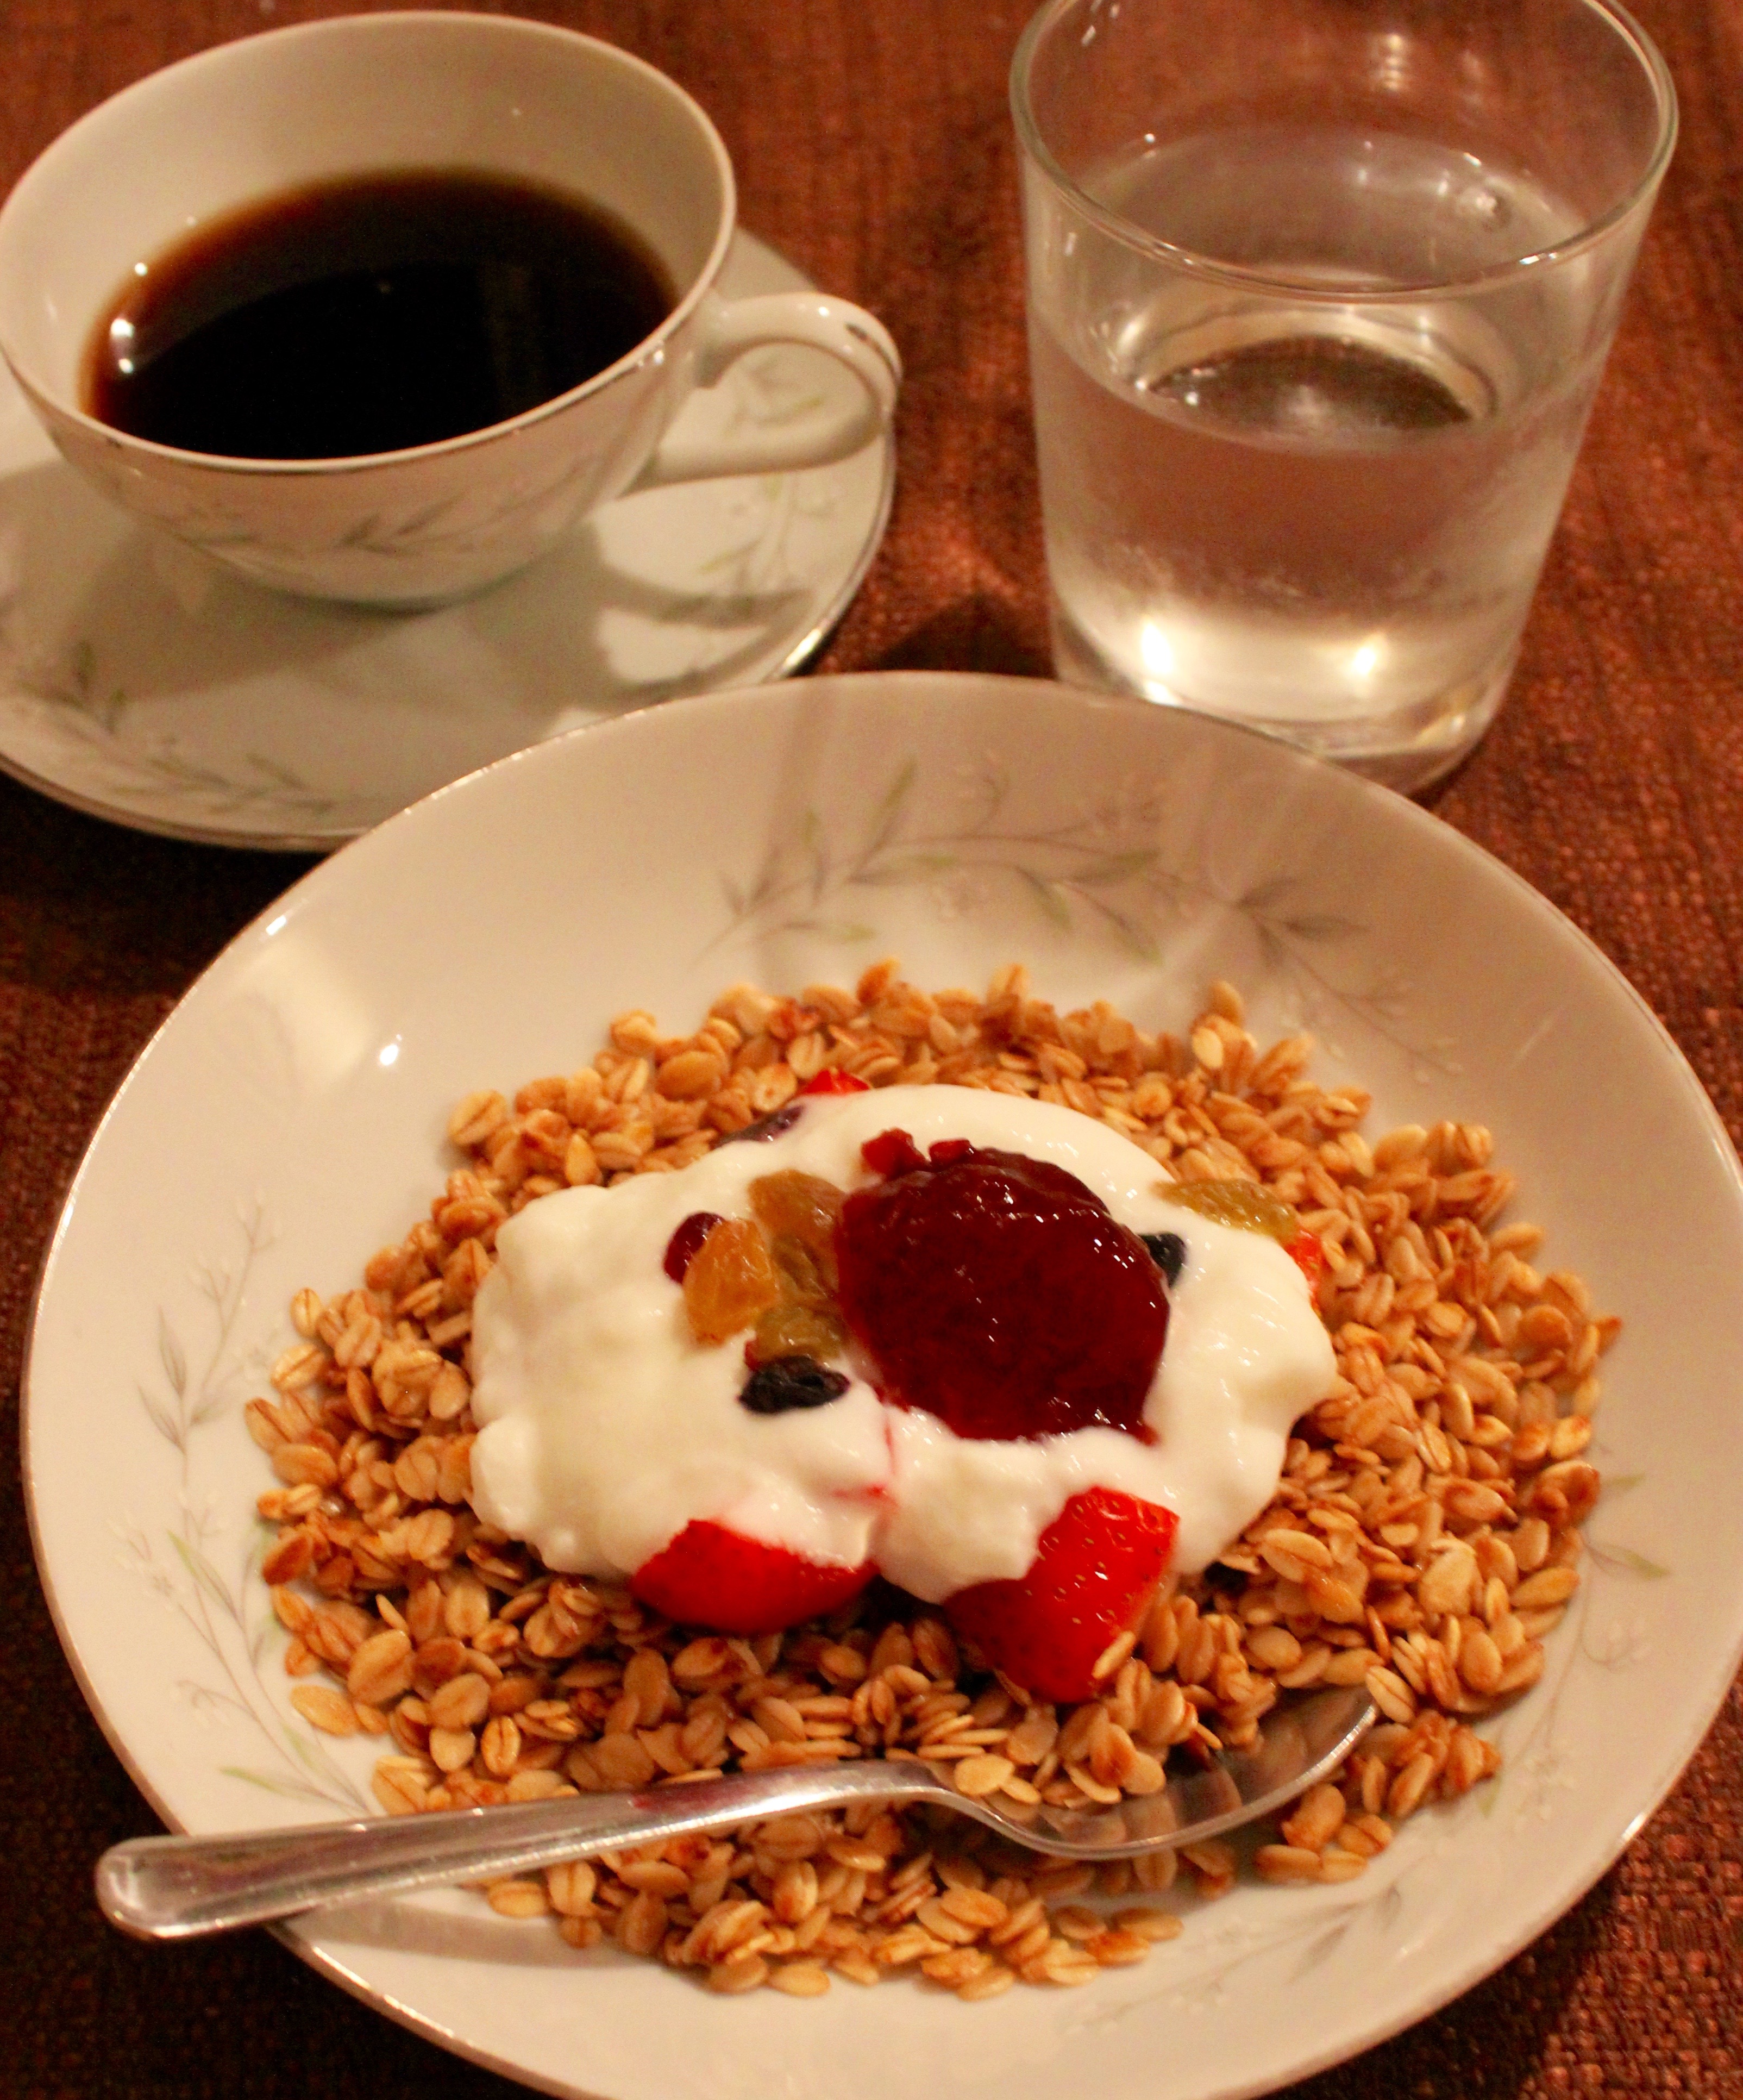 Certified Gluten Free granola with goat yoghurt, dried fruit, fresh strawberries, and a dollop of jam. 